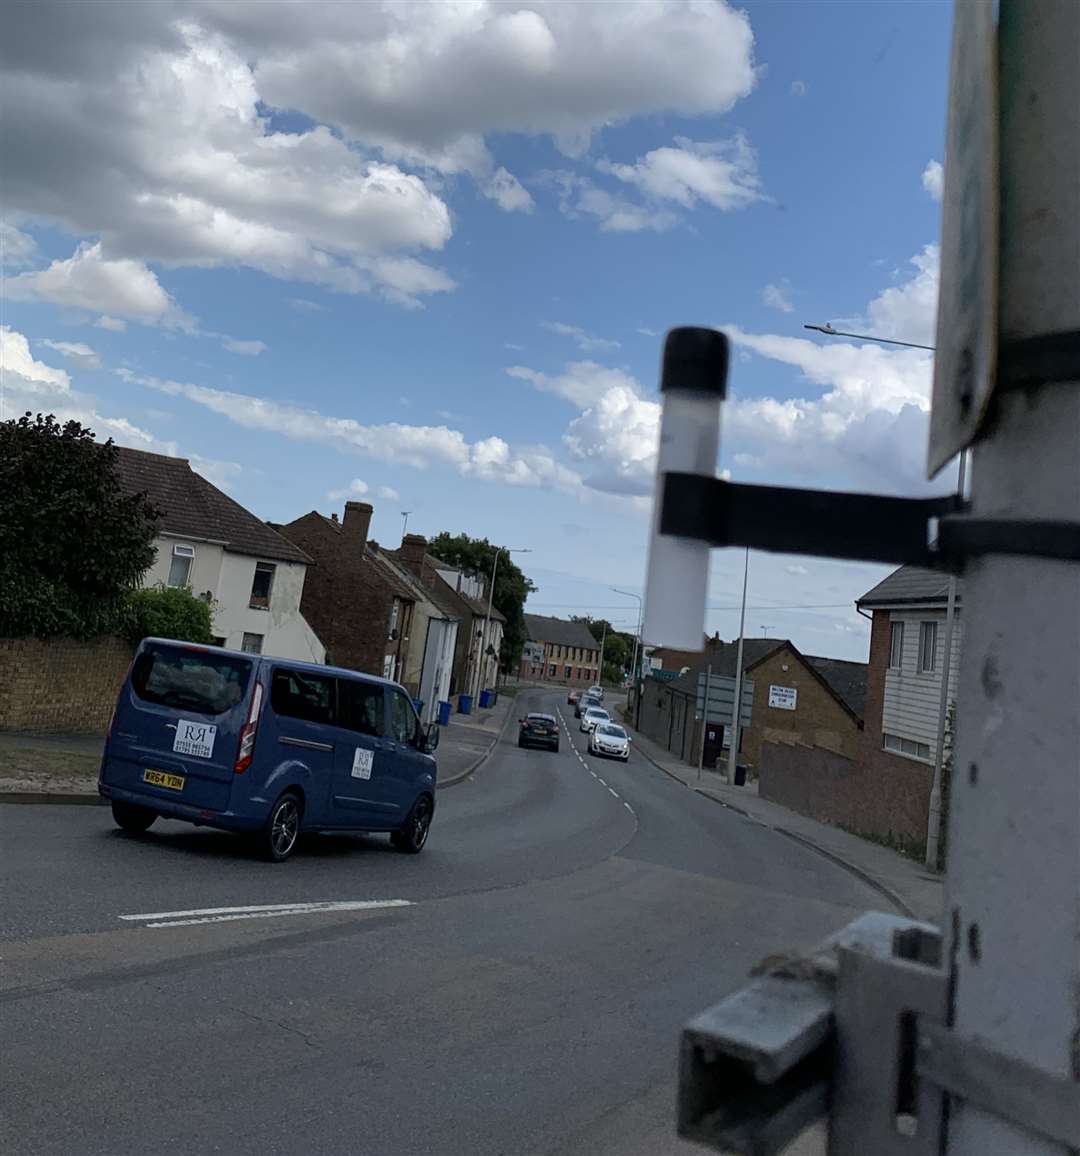 One of the sensors used to detect emissions in St Pauls Street in Milton Regis, near Sittingbourne